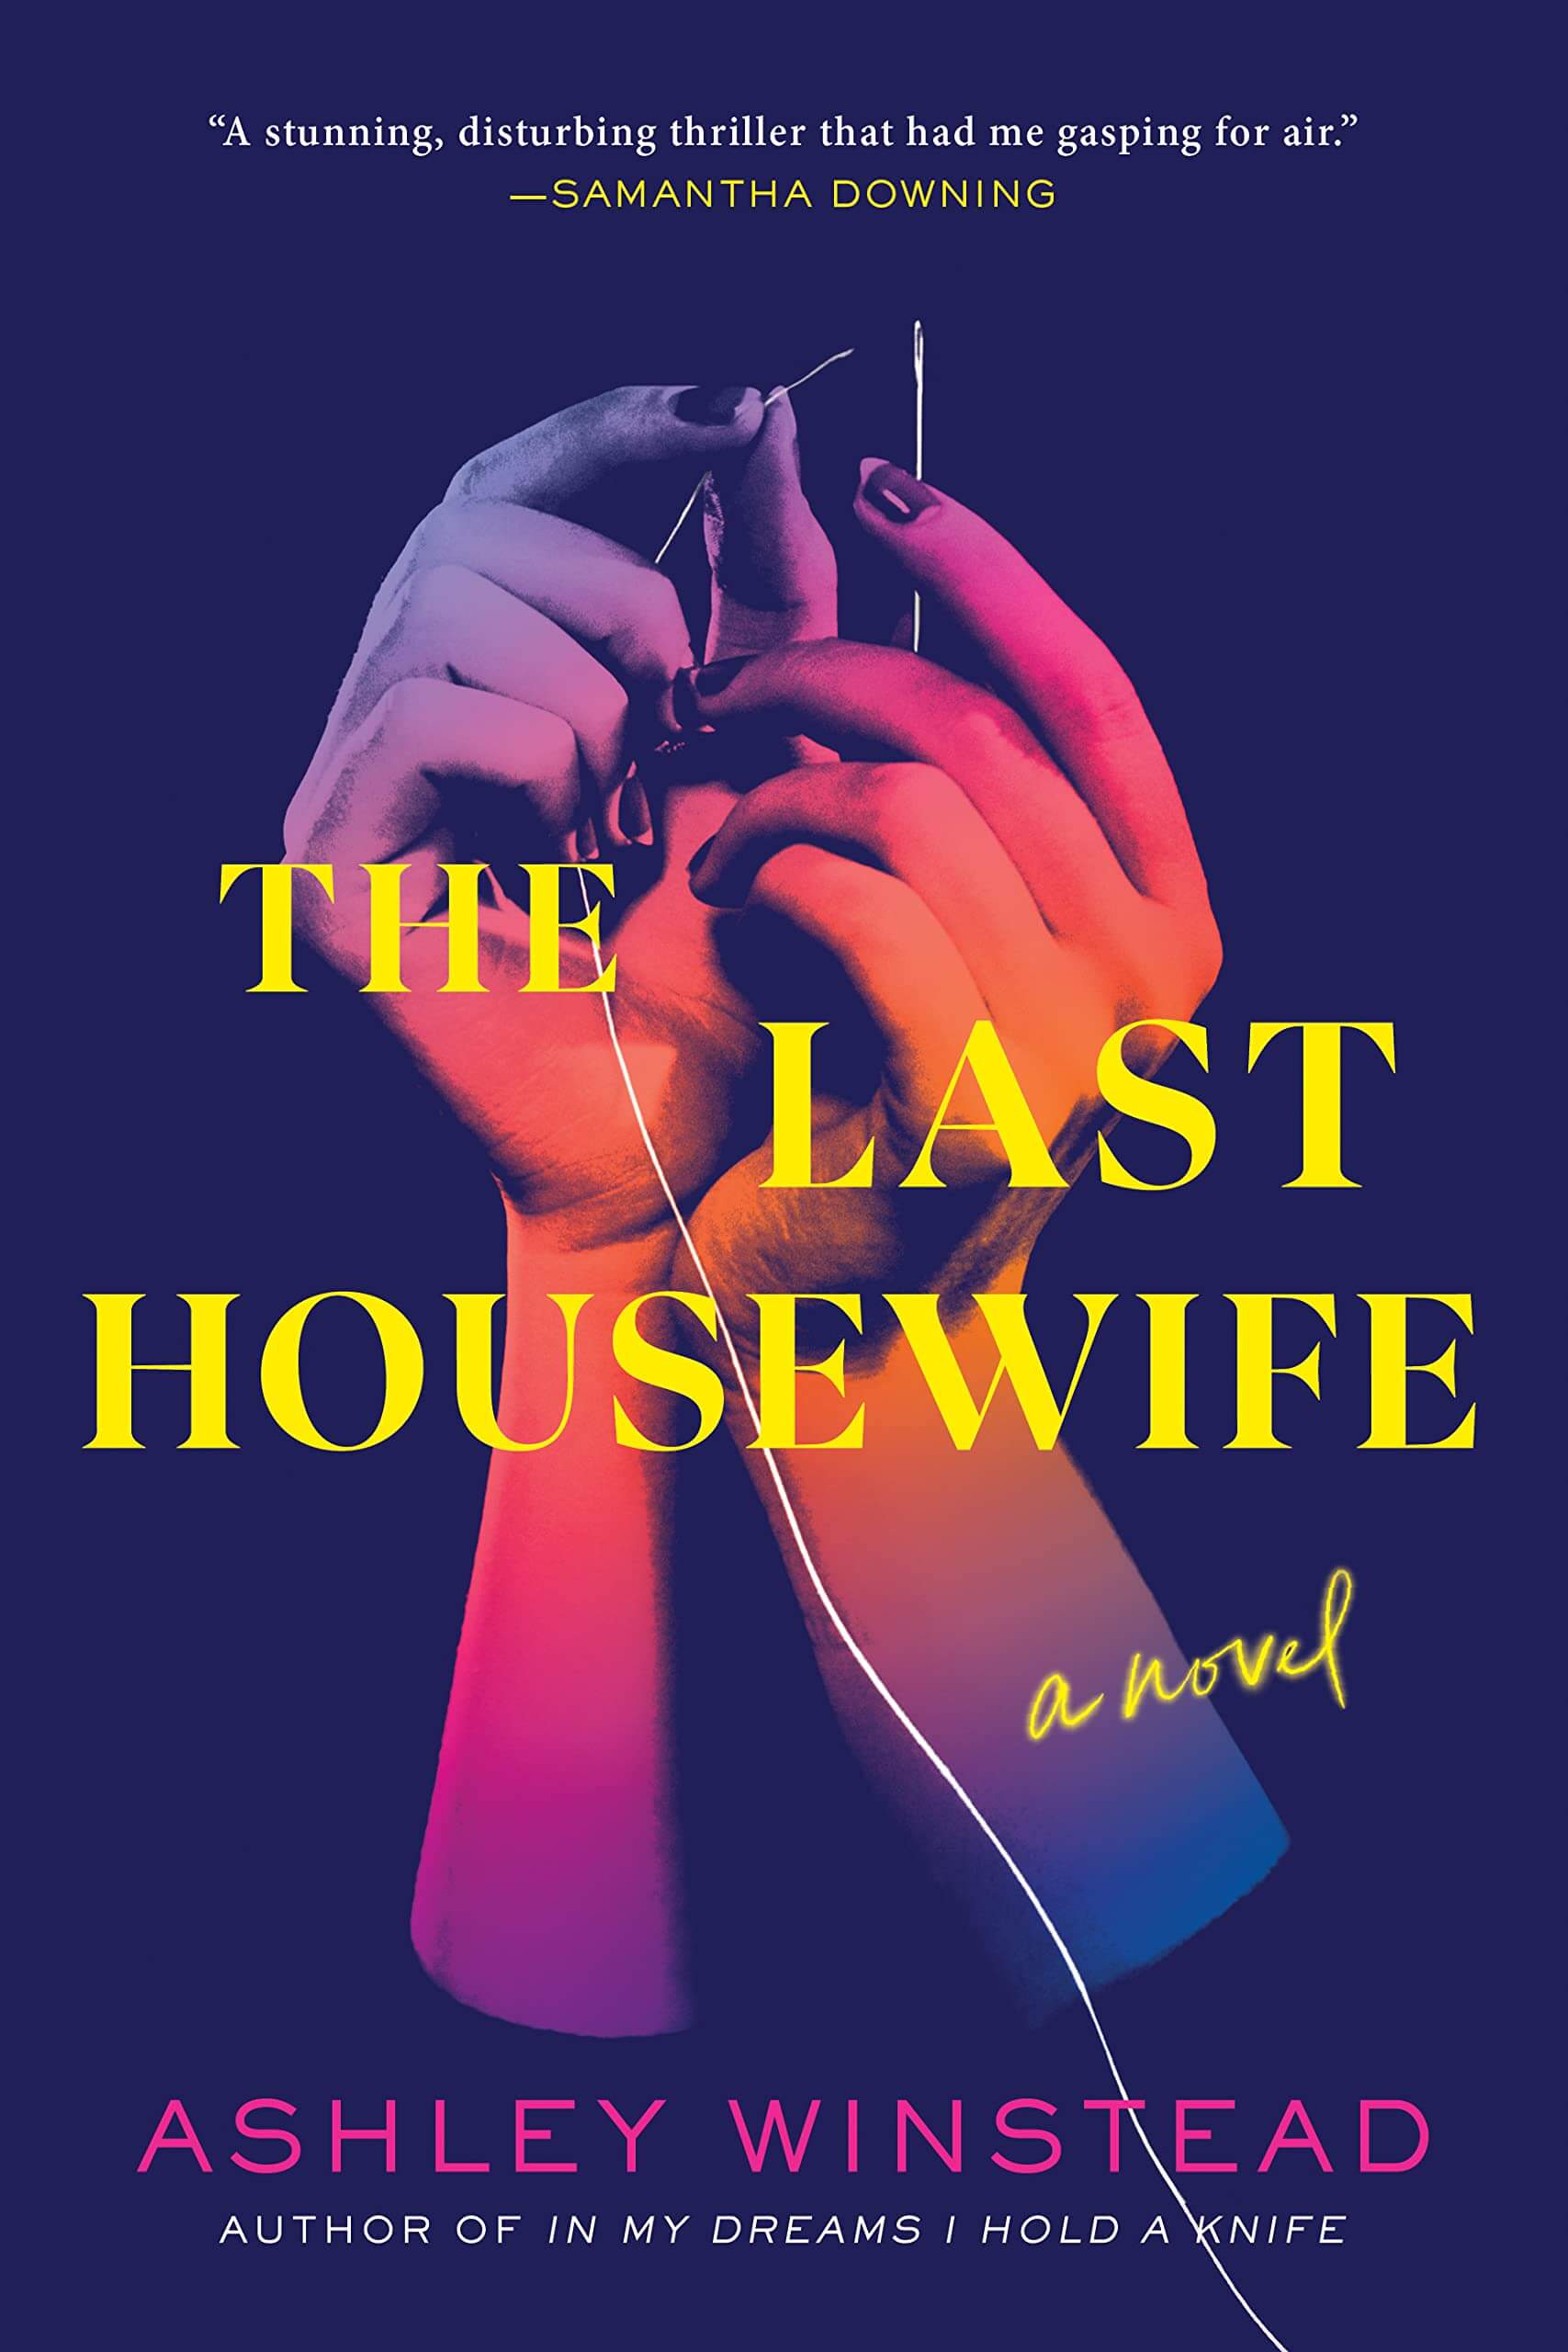 Cover of The Last Housewife by Ashley Winstead